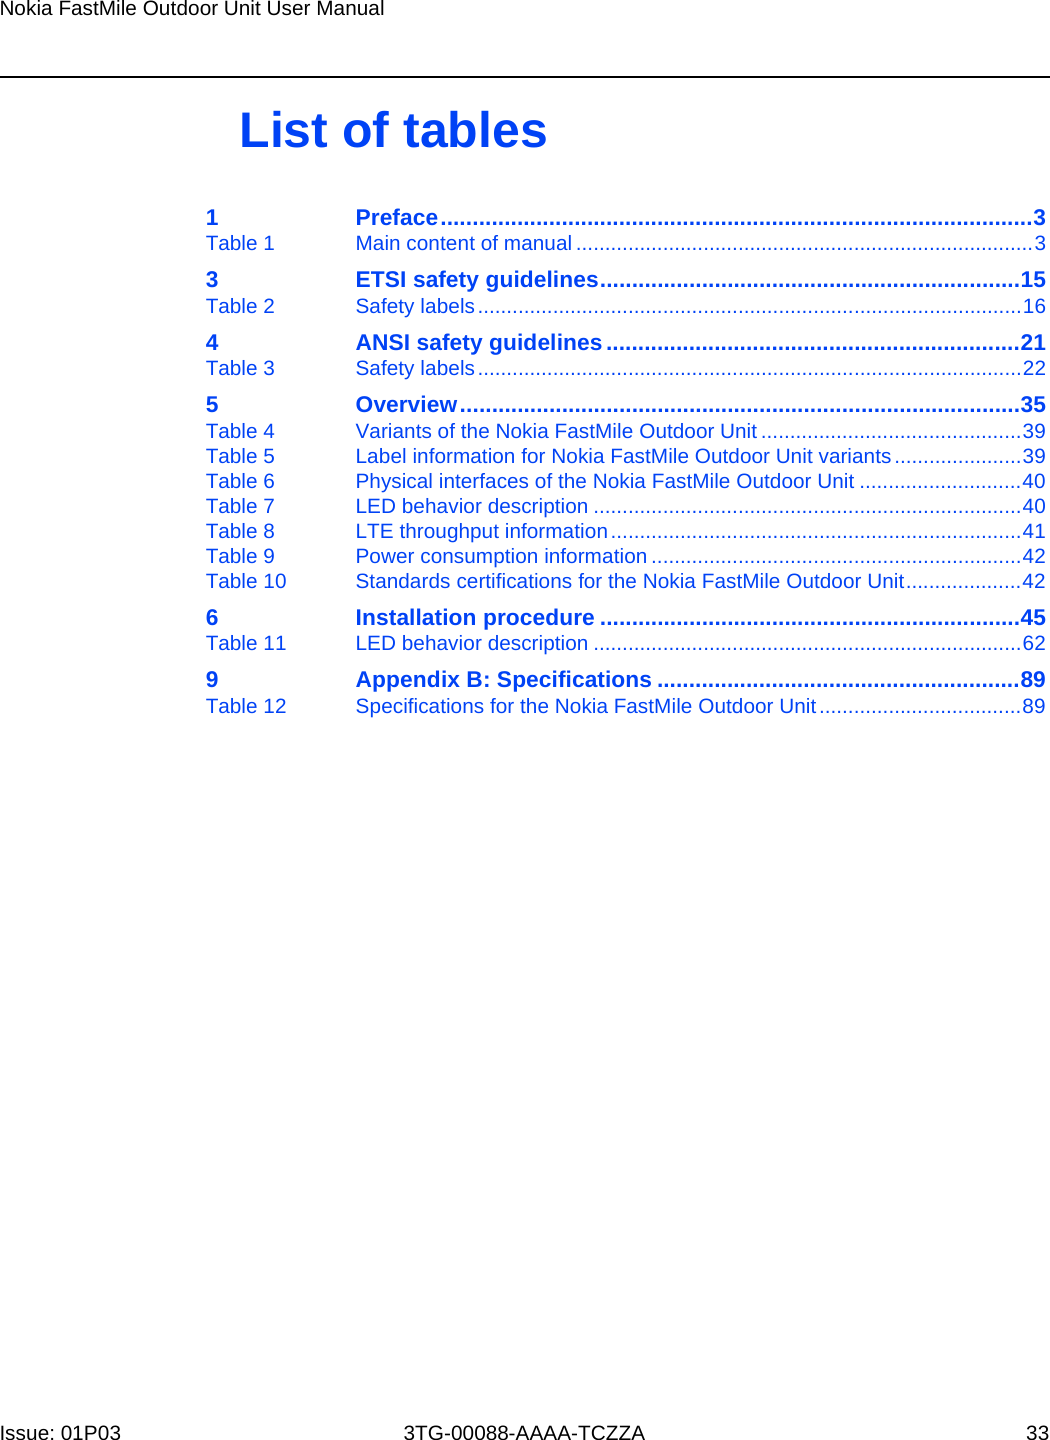 Page 30 of Nokia Bell 34003800FM20 FastMile Compact User Manual Nokia FastMile Outdoor Unit